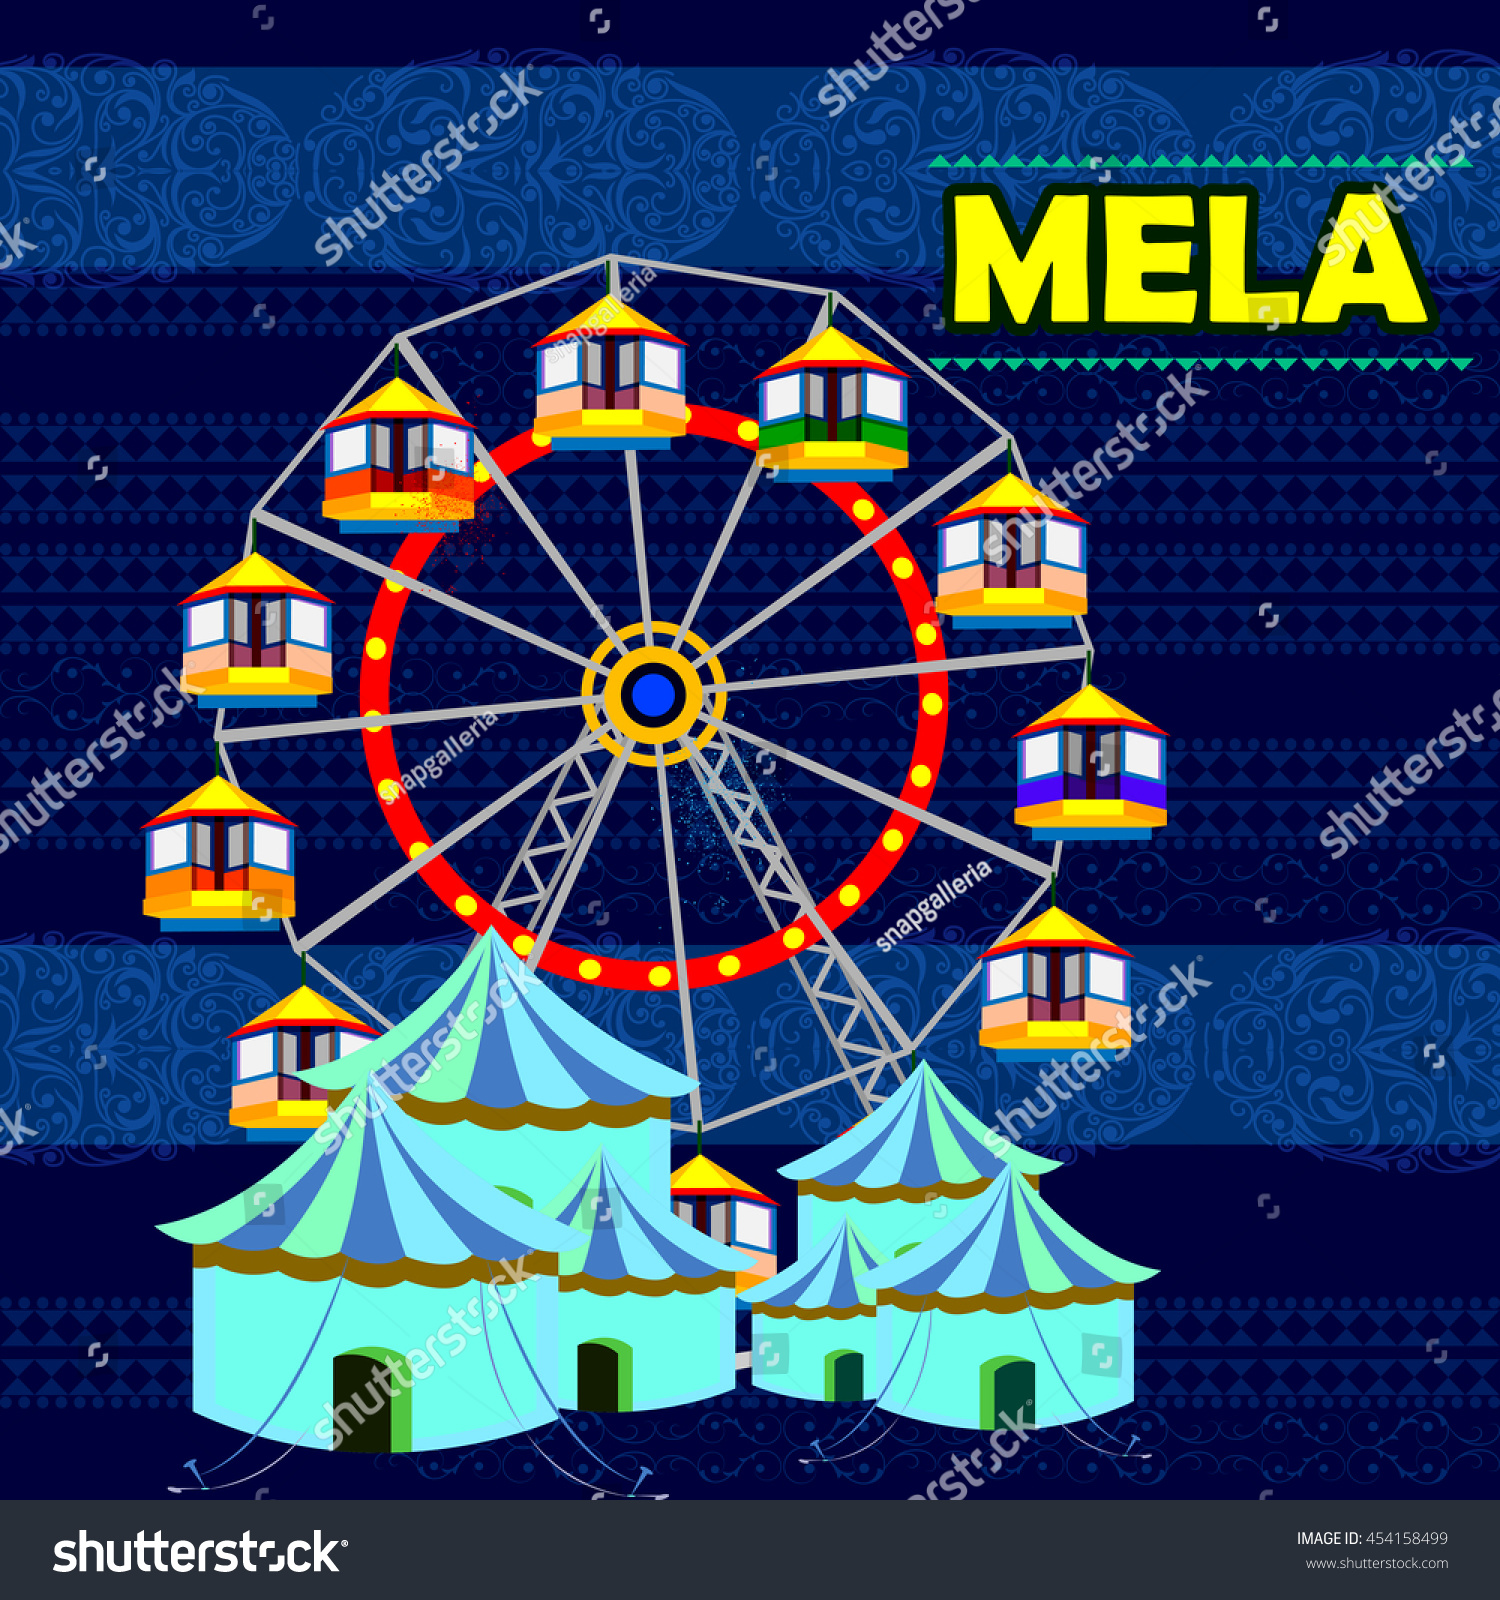 Easy Edit Vector Illustration Indian Mela Stock Vector Royalty Free 454158499 Share your drawings with friends, family, and the world on drawingnow, connect with other artists and create your own gallery. https www shutterstock com image vector easy edit vector illustration indian mela 454158499